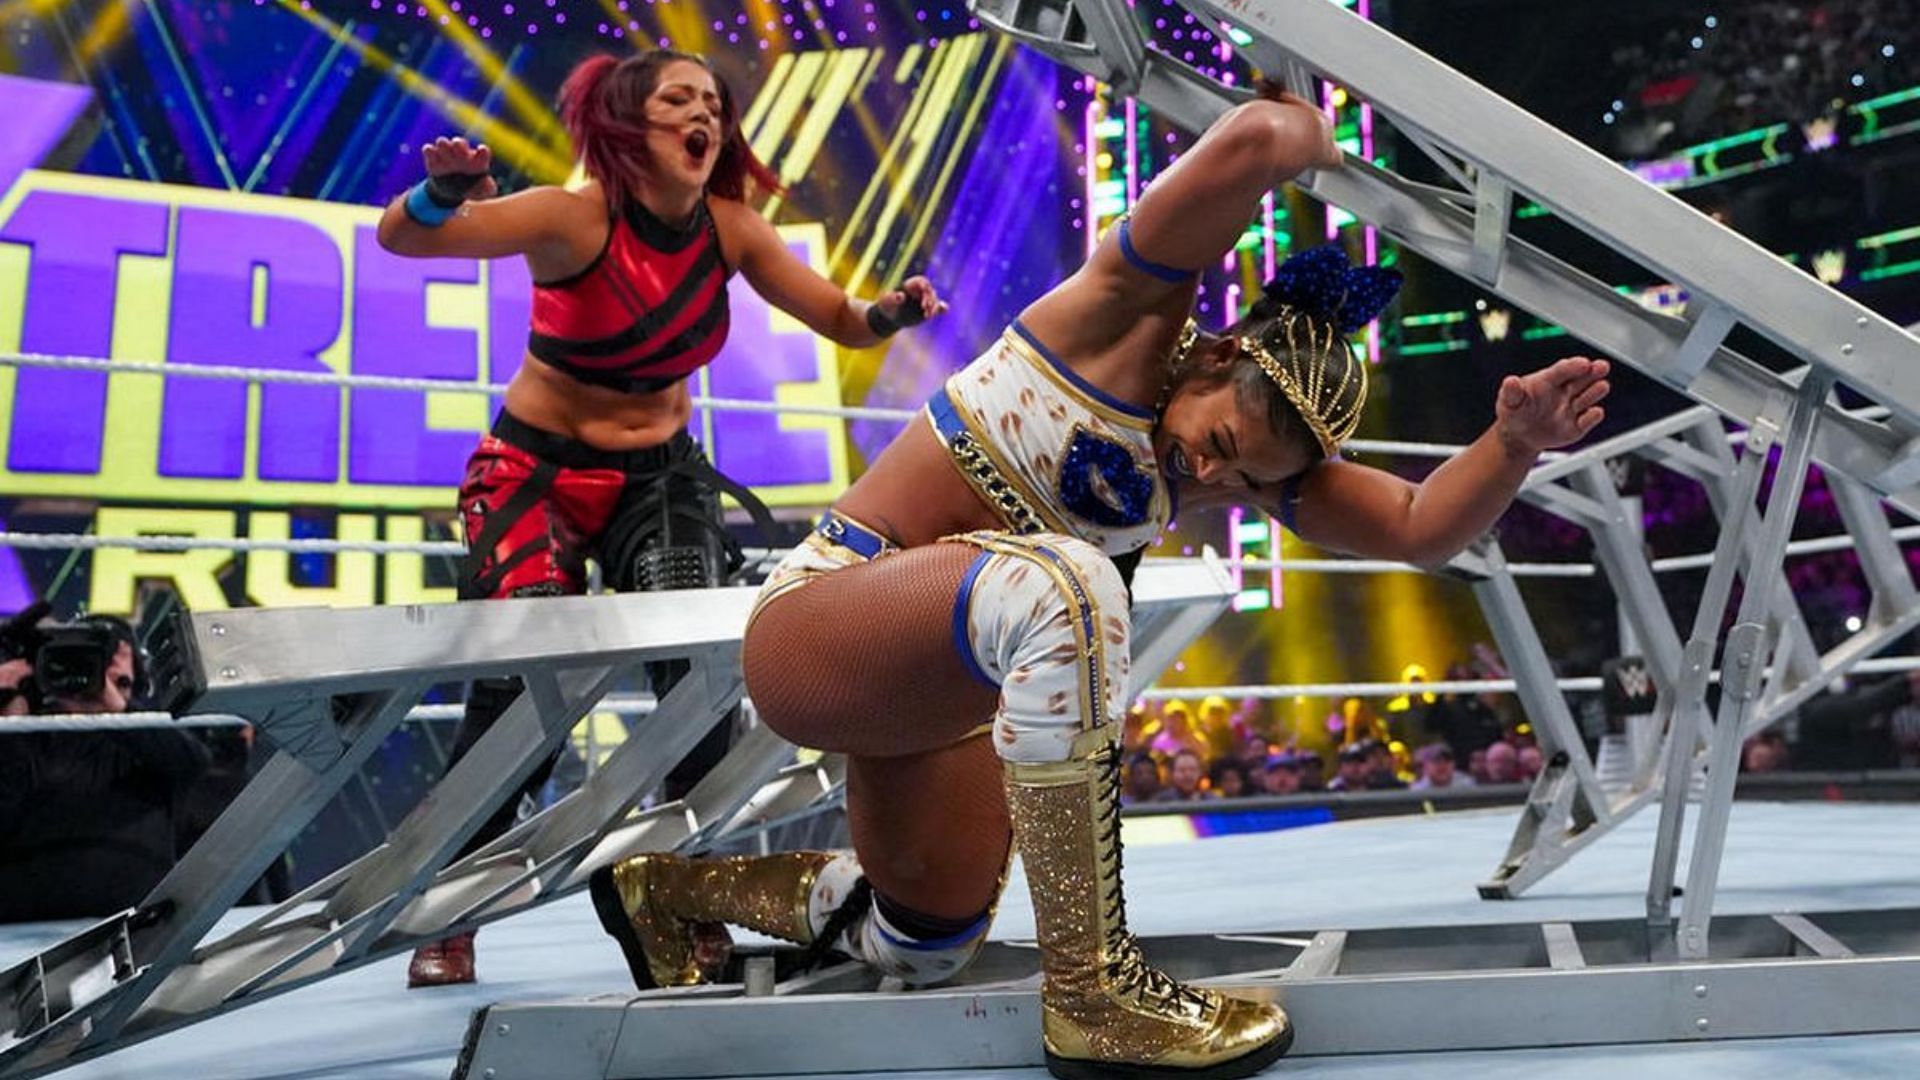 Bianca Belair and Bayley fought in a crazy ladder match